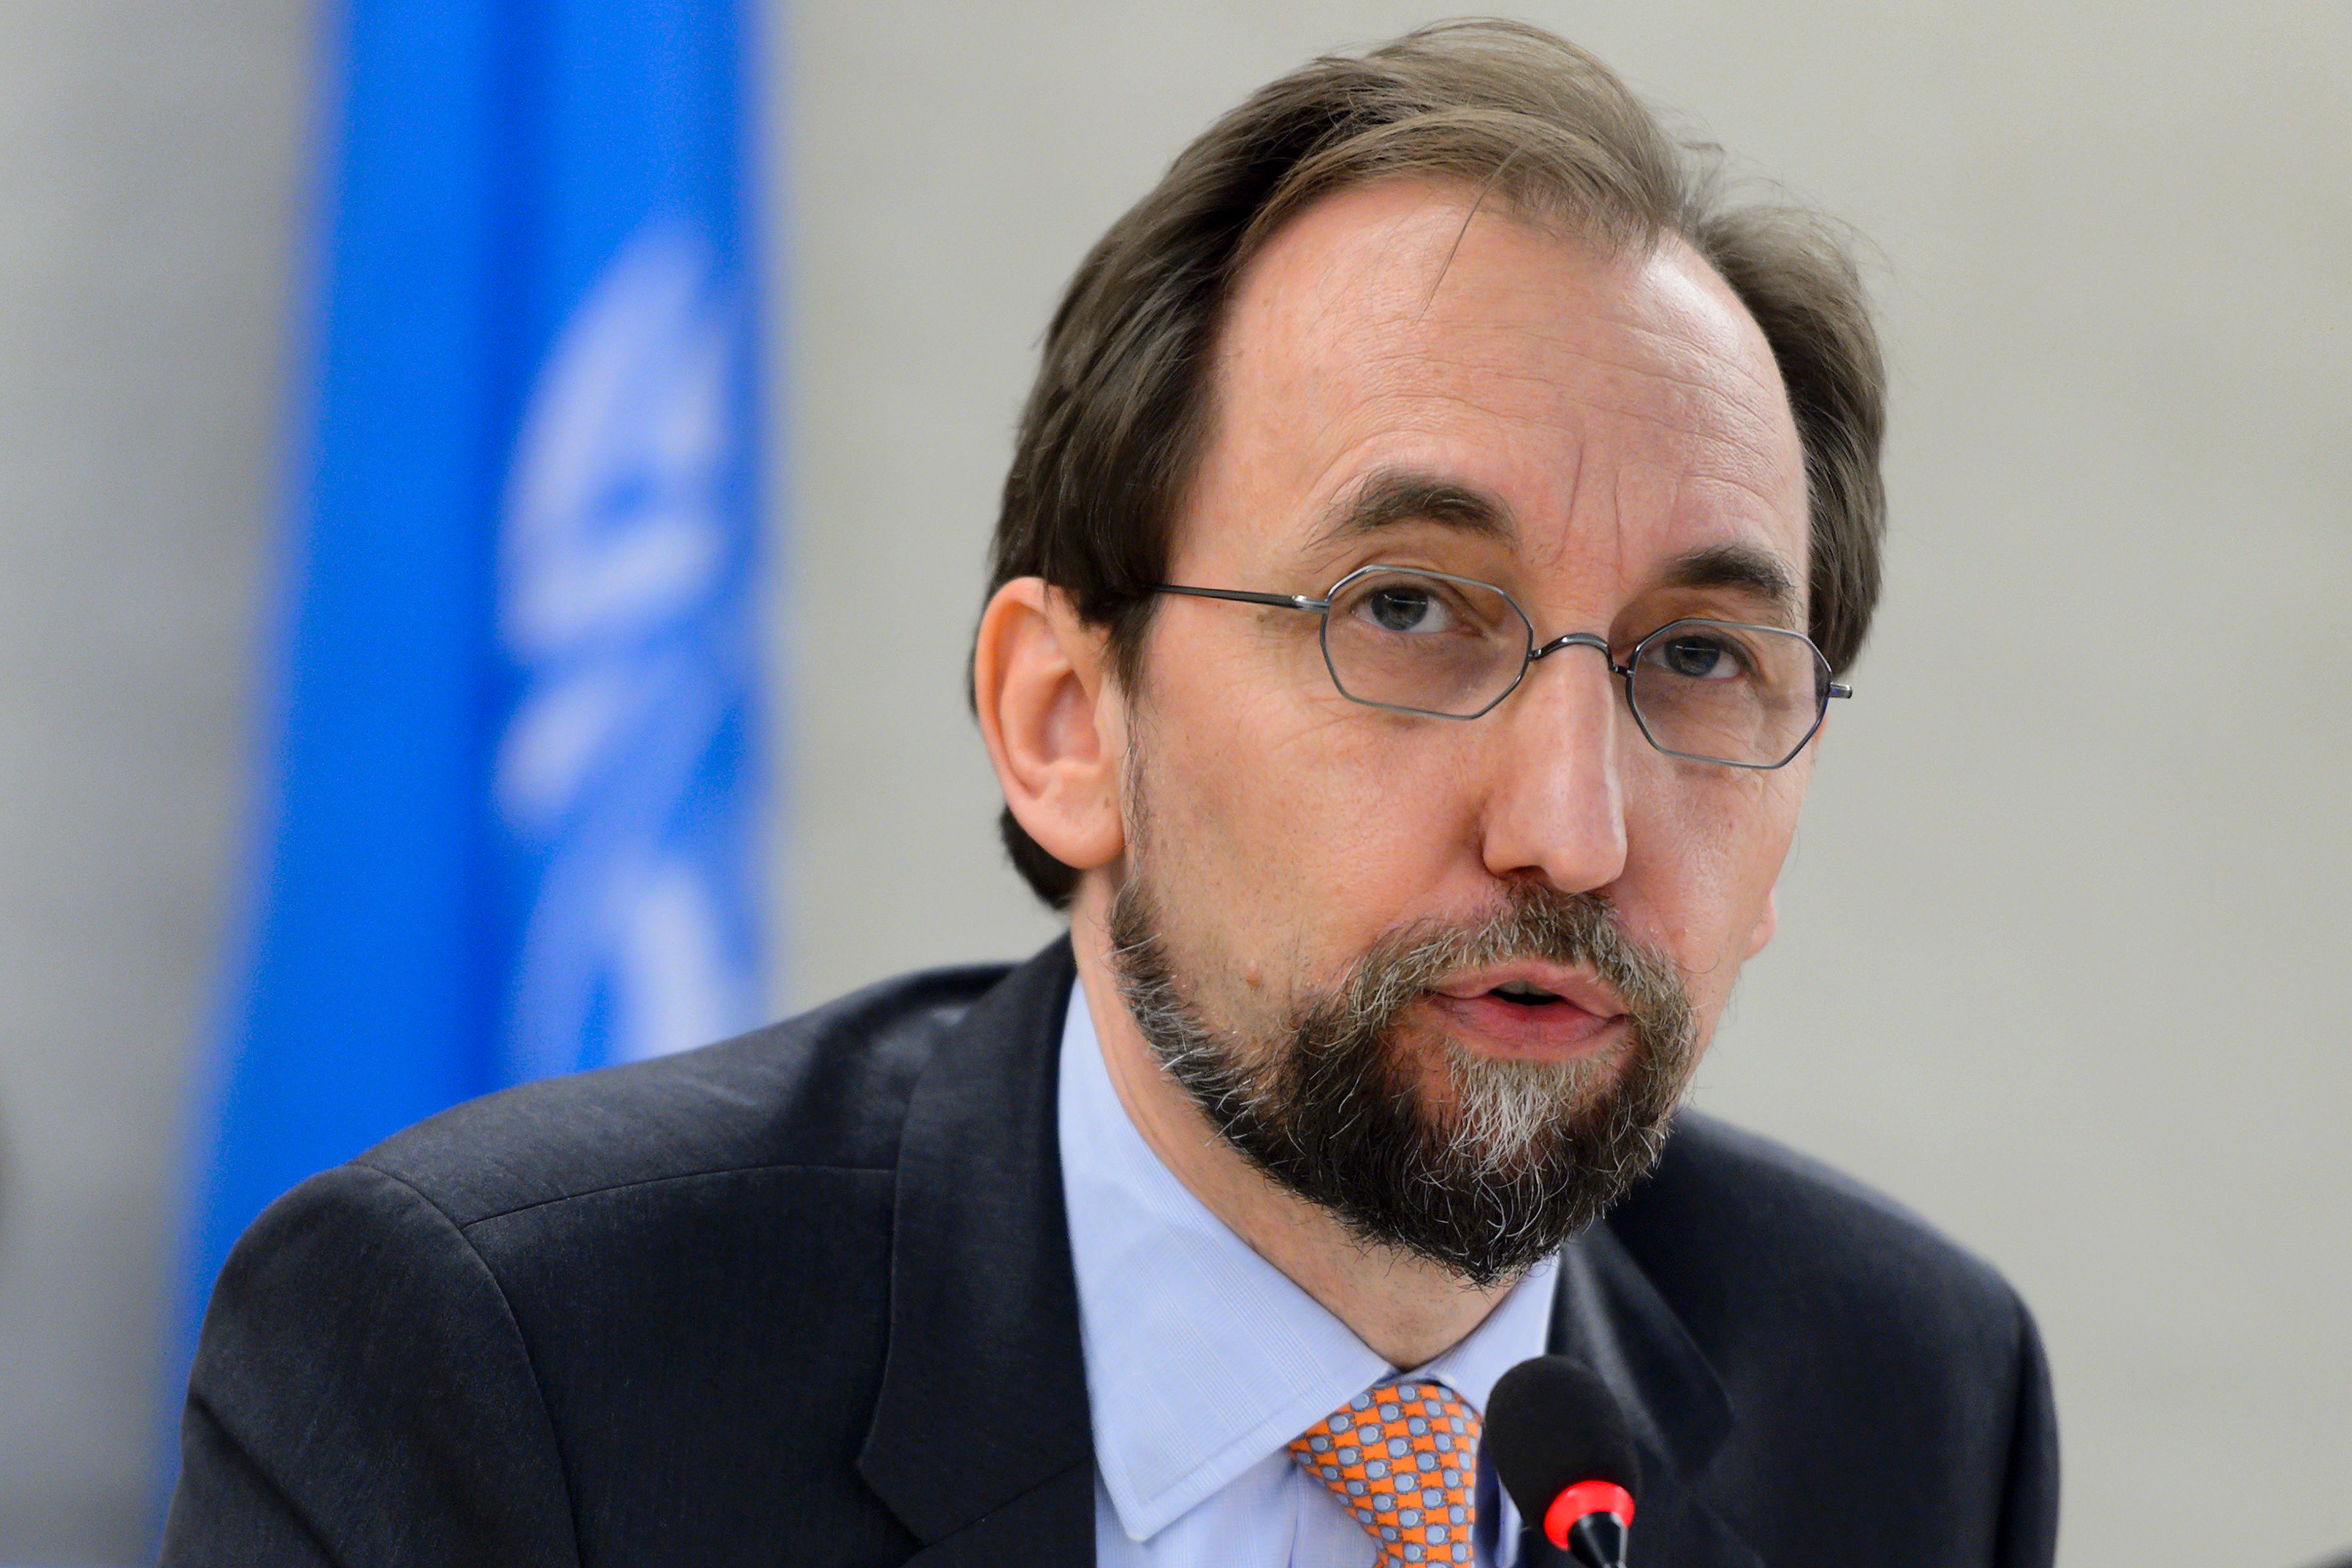 U.N. High Commissioner for Human Rights Zeid Ra'ad al-Hussein delivers a speech at the opening of a new council's session on June 13, 2016, in Geneva (Fabrice Coffrini—AFP/Getty Images)